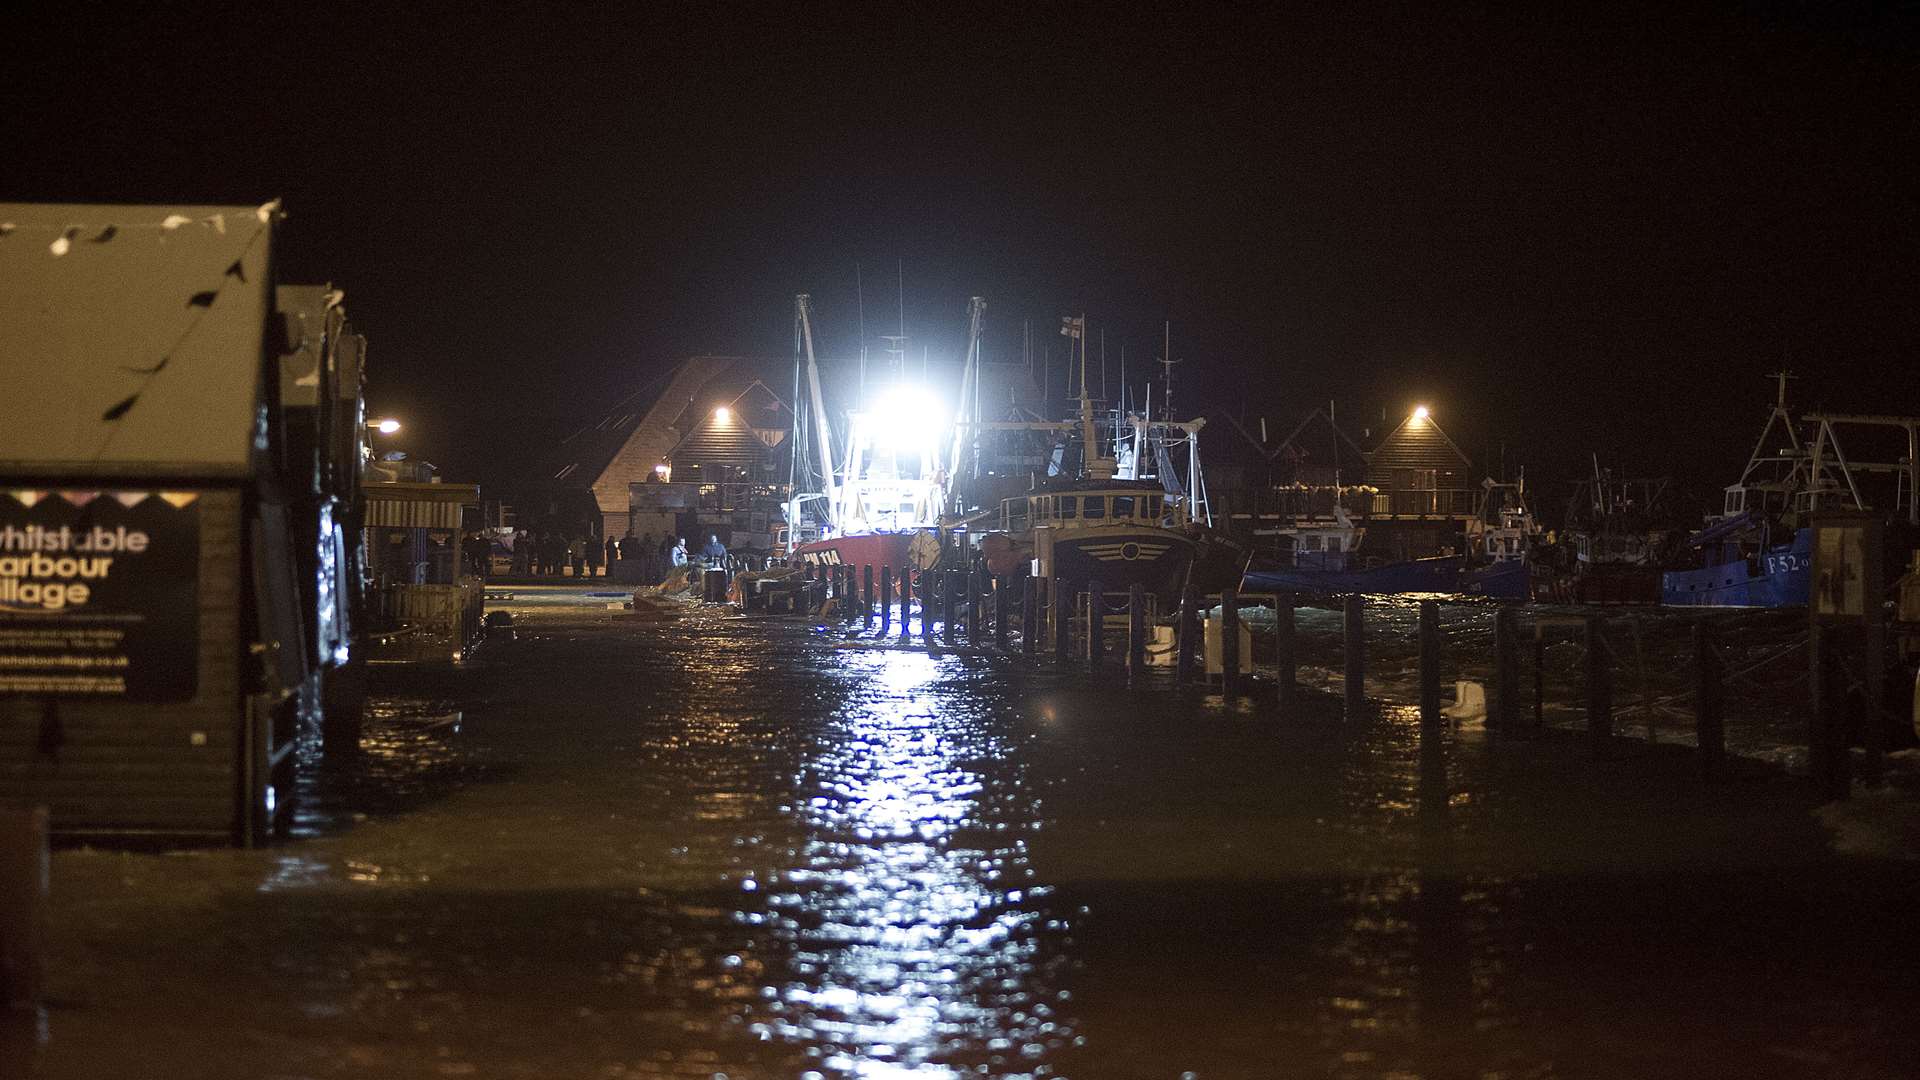 High tide swept over Whitstable harbour in 2013.